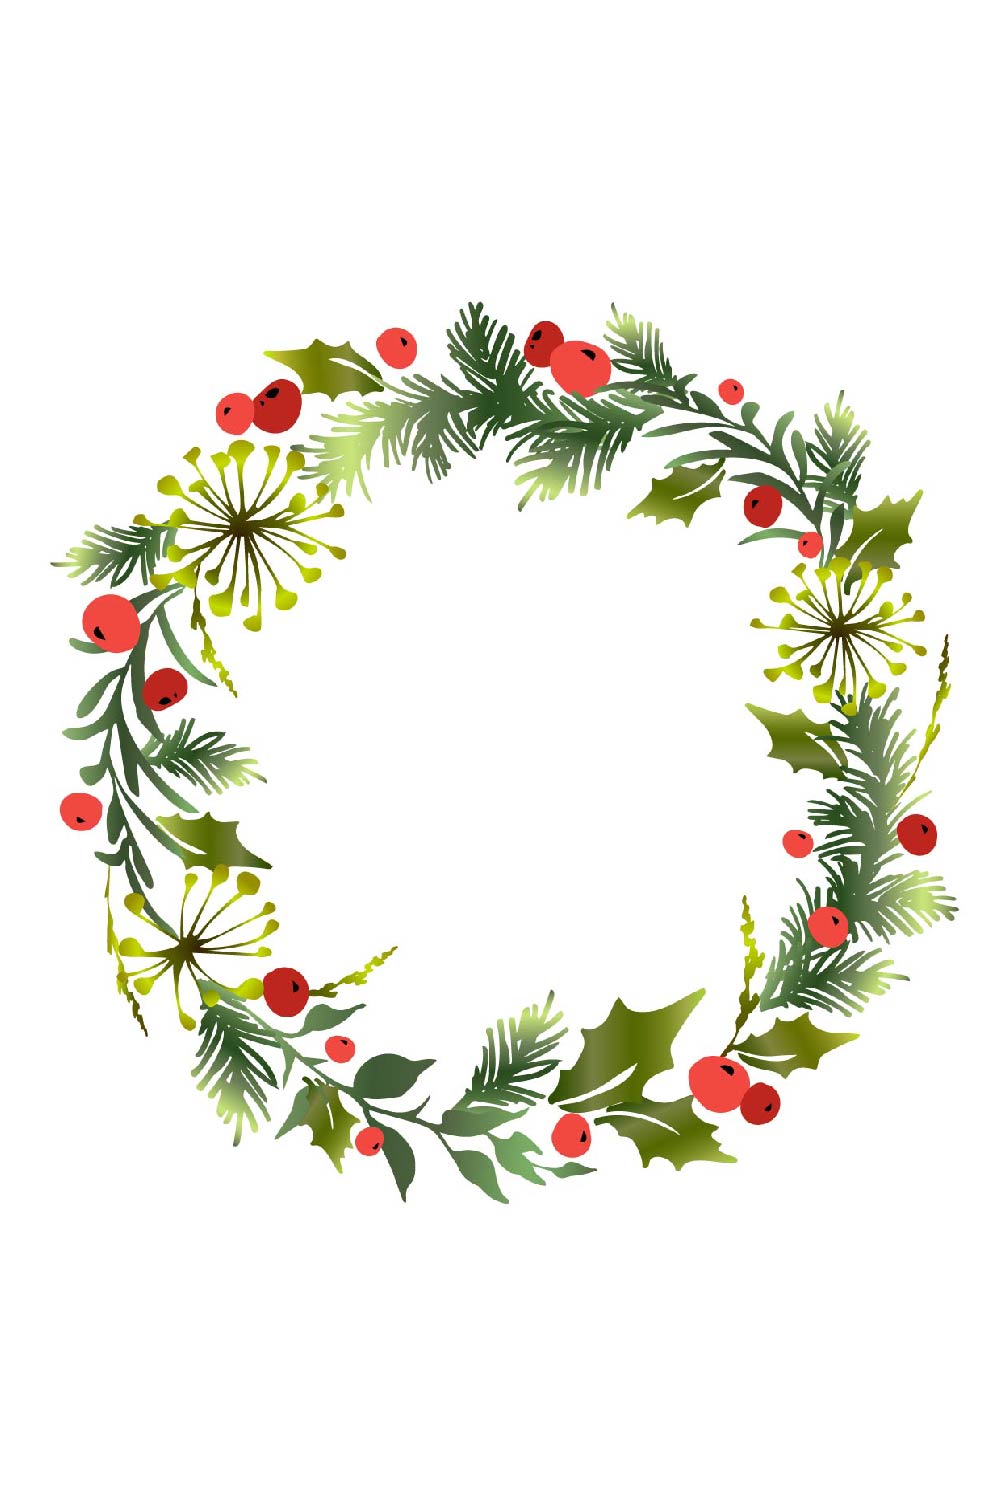 Charming image with a decorative Christmas wreath with mistletoe leaves, fir branches and holly berries.